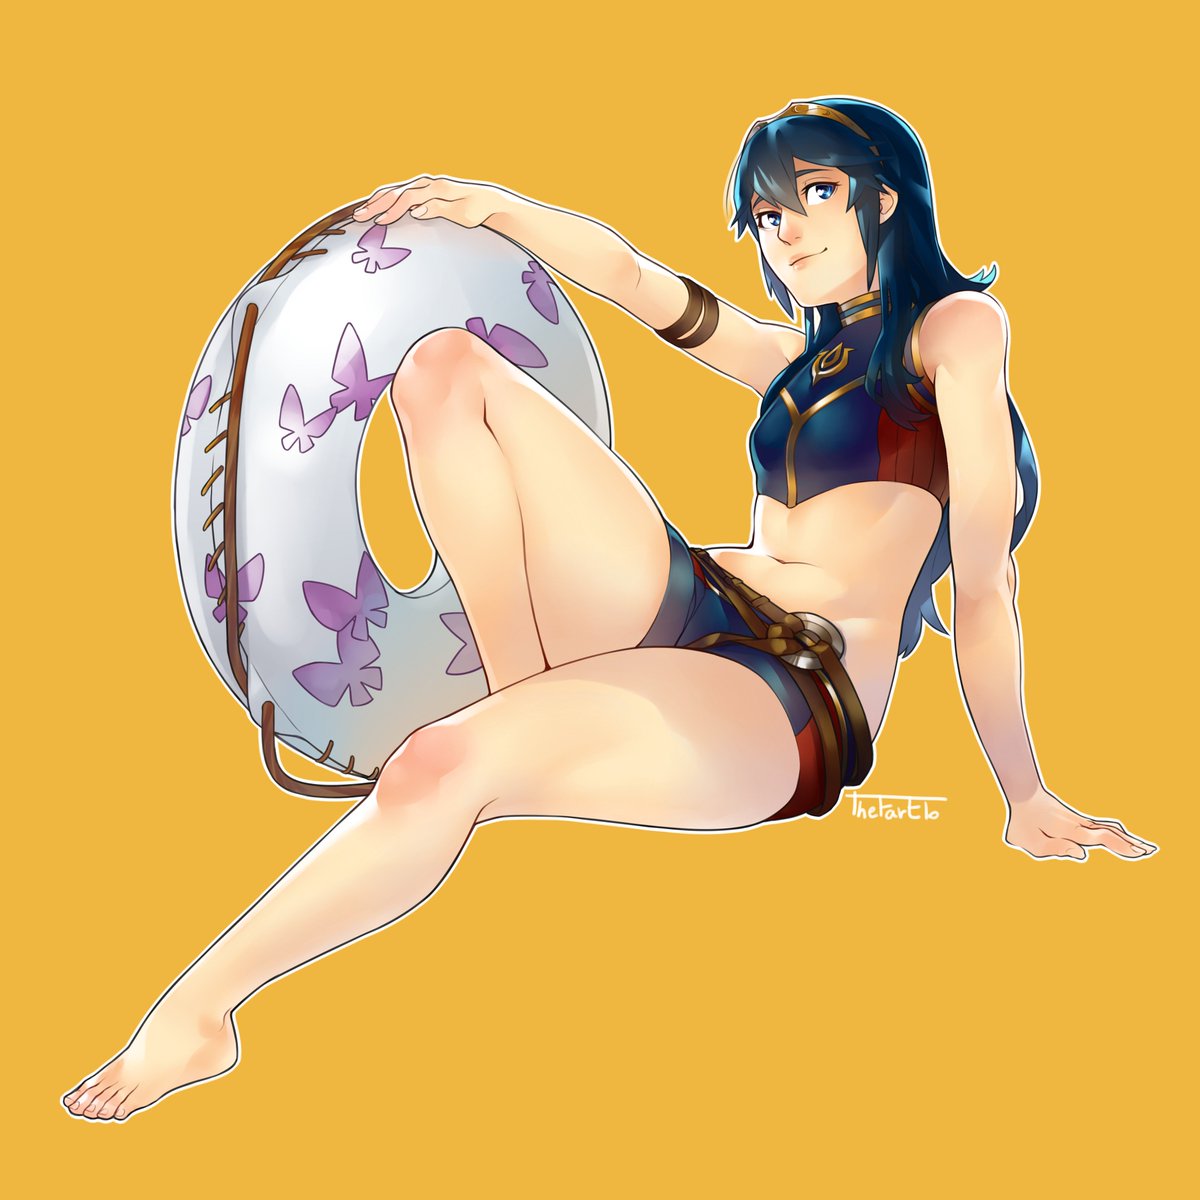 Here's #Lucina in a swimsuit #FireEmblem.